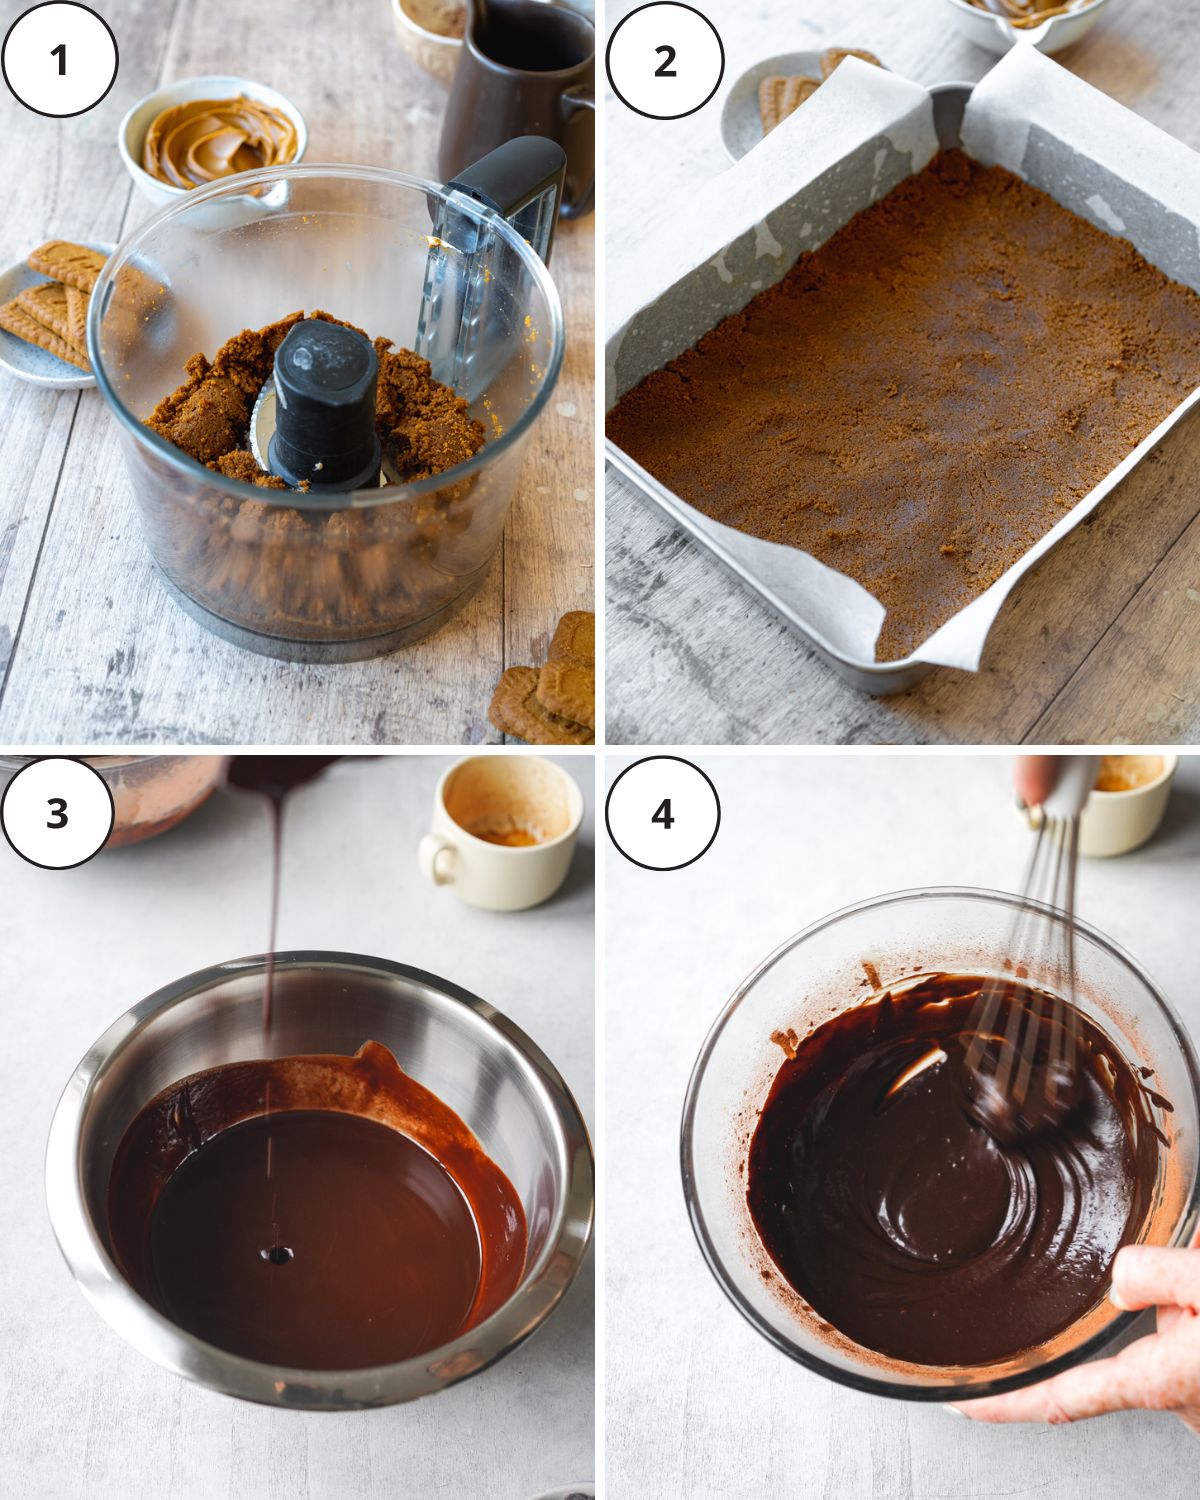 4 images showing biscoff cookies in a food processor, biscoff cookies in the base of a baking tin, and melted chocolate in a clear bowl.